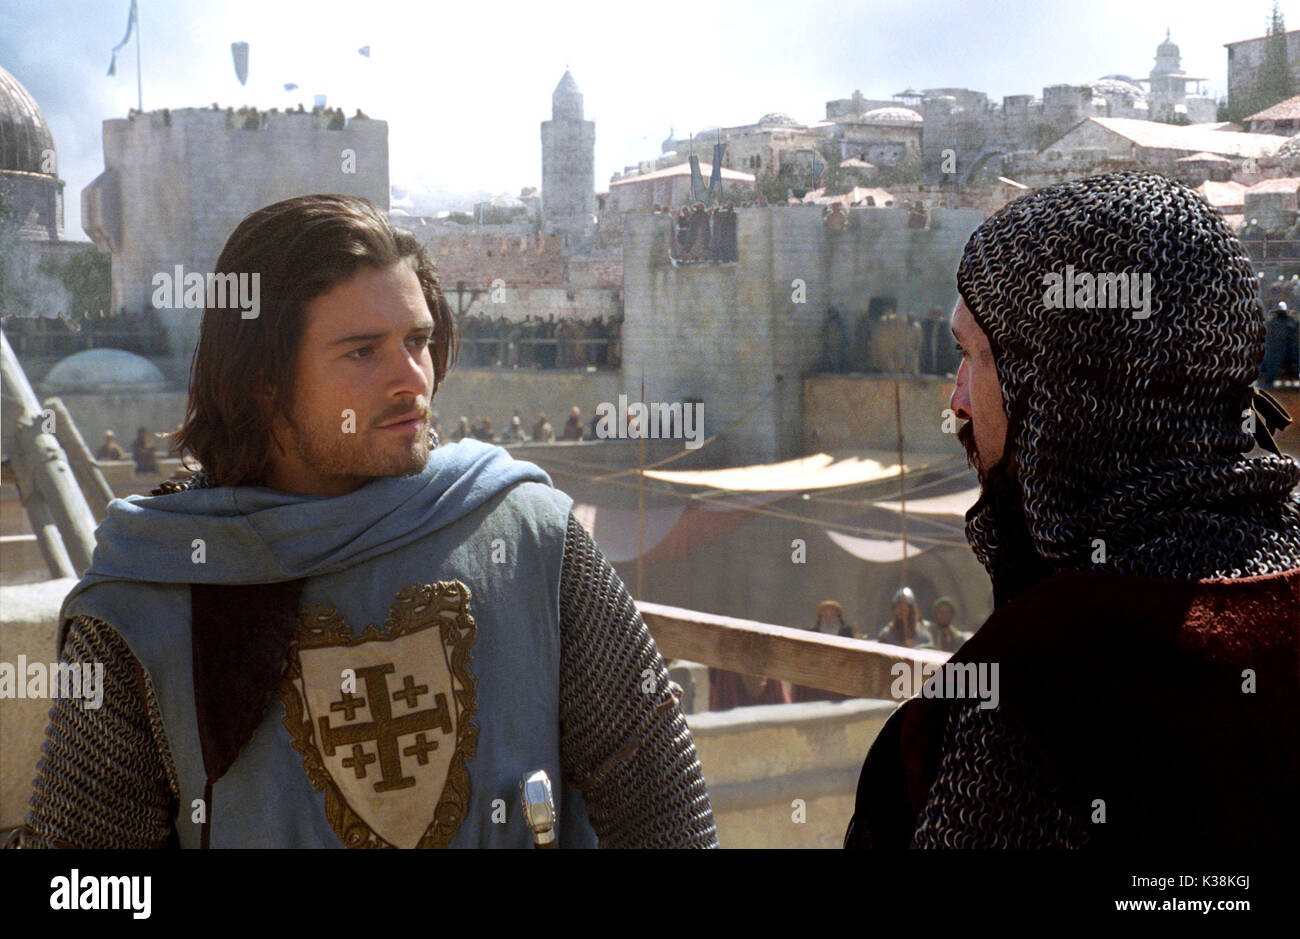 KINGDOM OF HEAVEN ORLANDO BLOOM, as Balian AND MARTIN HANCOCK,as a newly anointed Knight as they defend Jerusalem   Balian and a newly anointed Knight (Martin Hancock) prepare to defend Jerusalem against overwhelming forces.     Date: 2005 Stock Photo